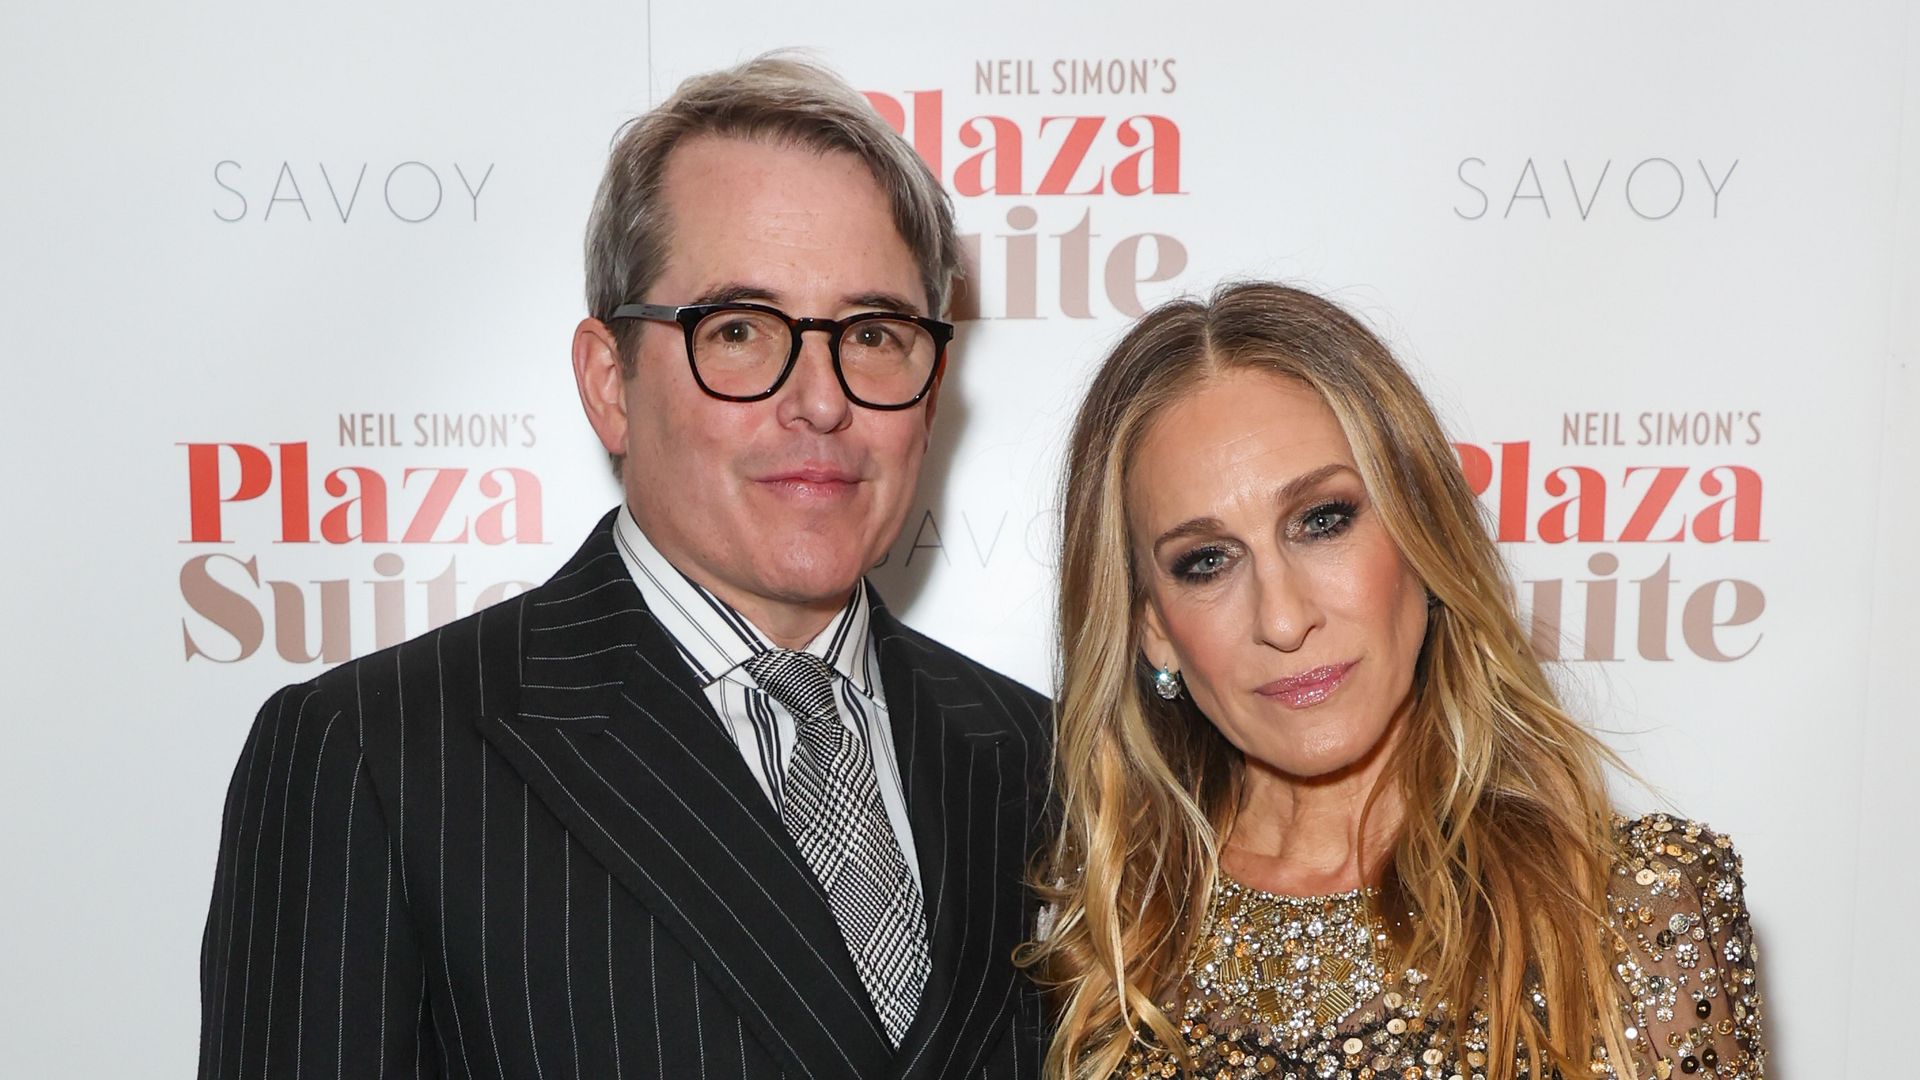 Matthew Broderick and Sarah Jessica Parker attend the gala performance after party for "Plaza Suite" at The Savoy Hotel on January 28, 2024 in London, England.